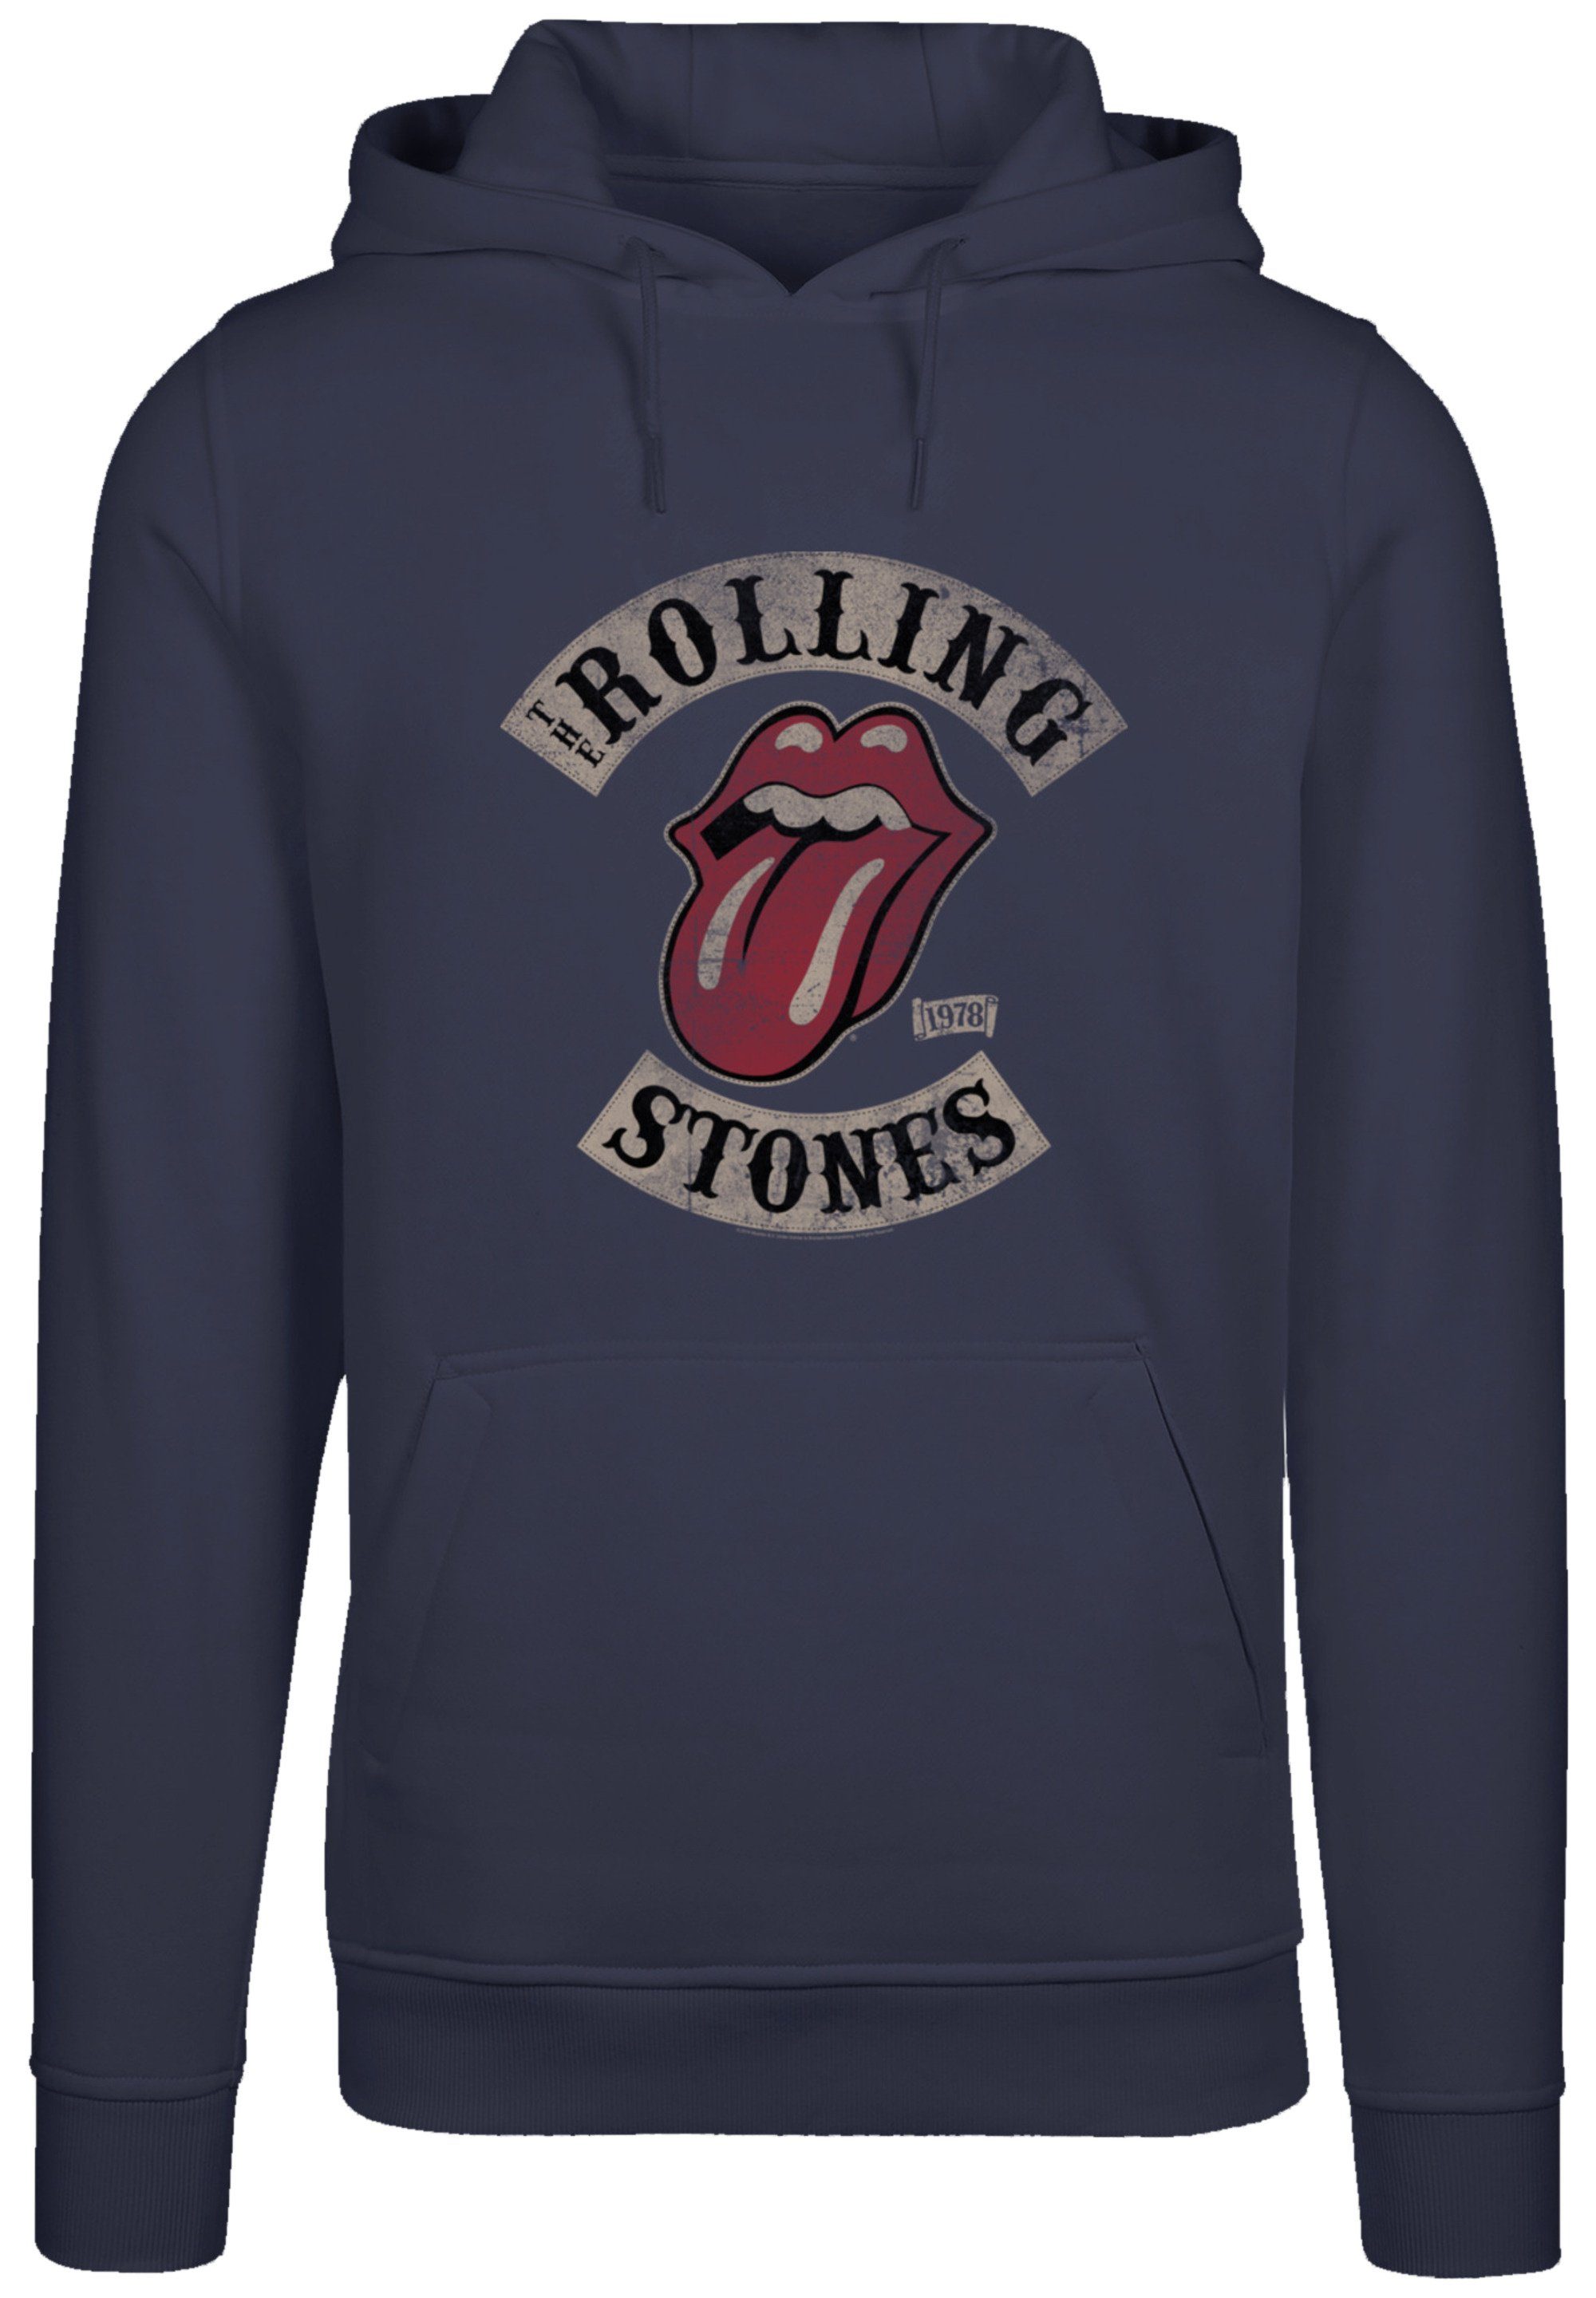 F4NT4STIC Kapuzenpullover The Rolling Stones Tour Rock Musik Band Hoodie, Warm, Bequem navy